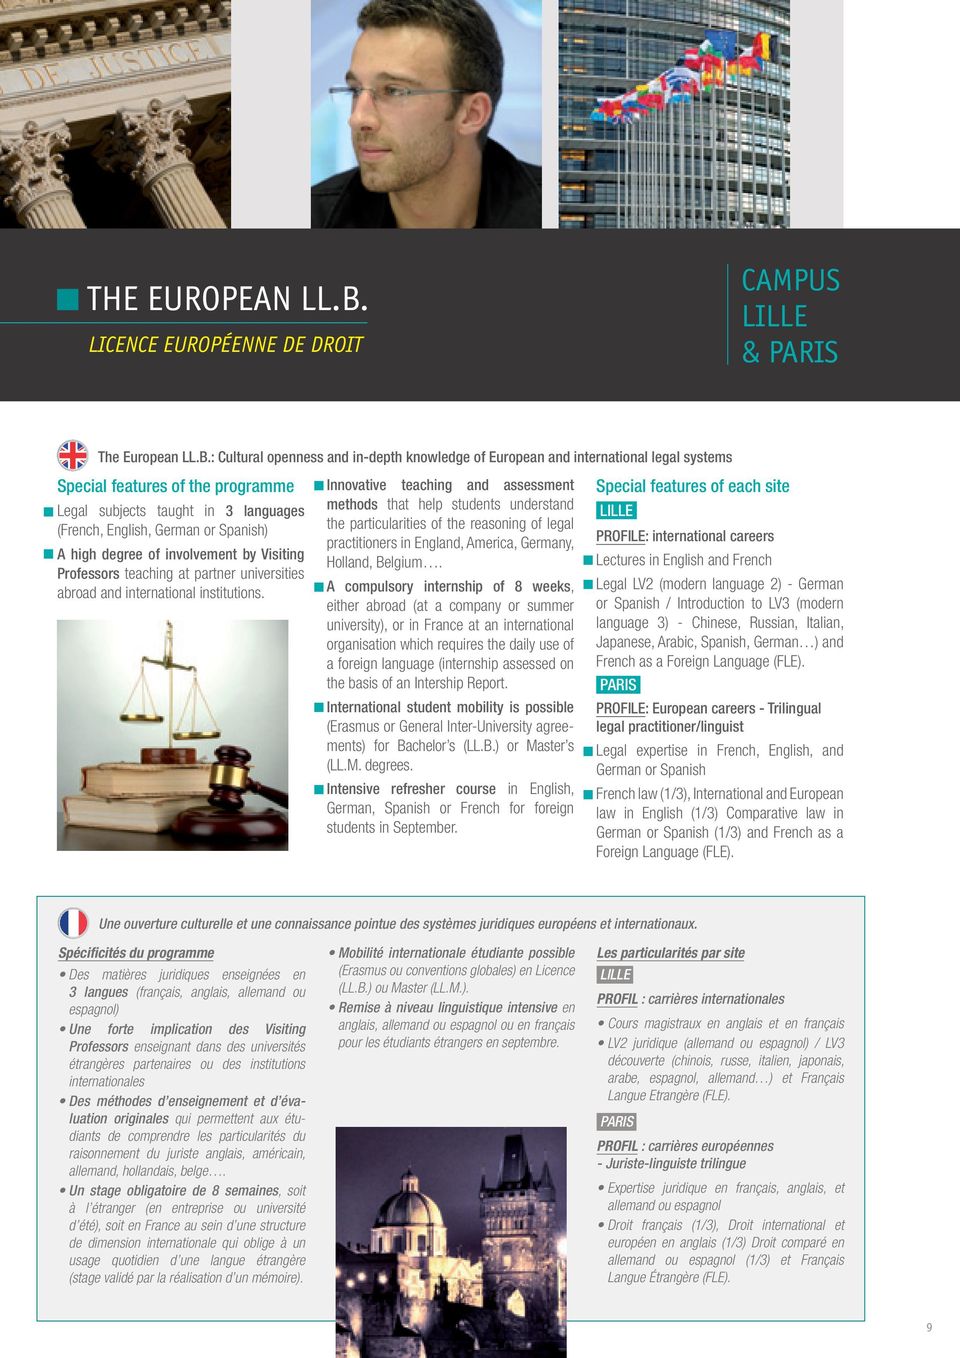 : Cultural openness and in-depth knowledge of European and international legal systems Special features of the programme Legal subjects taught in 3 languages (French, English, German or Spanish) A